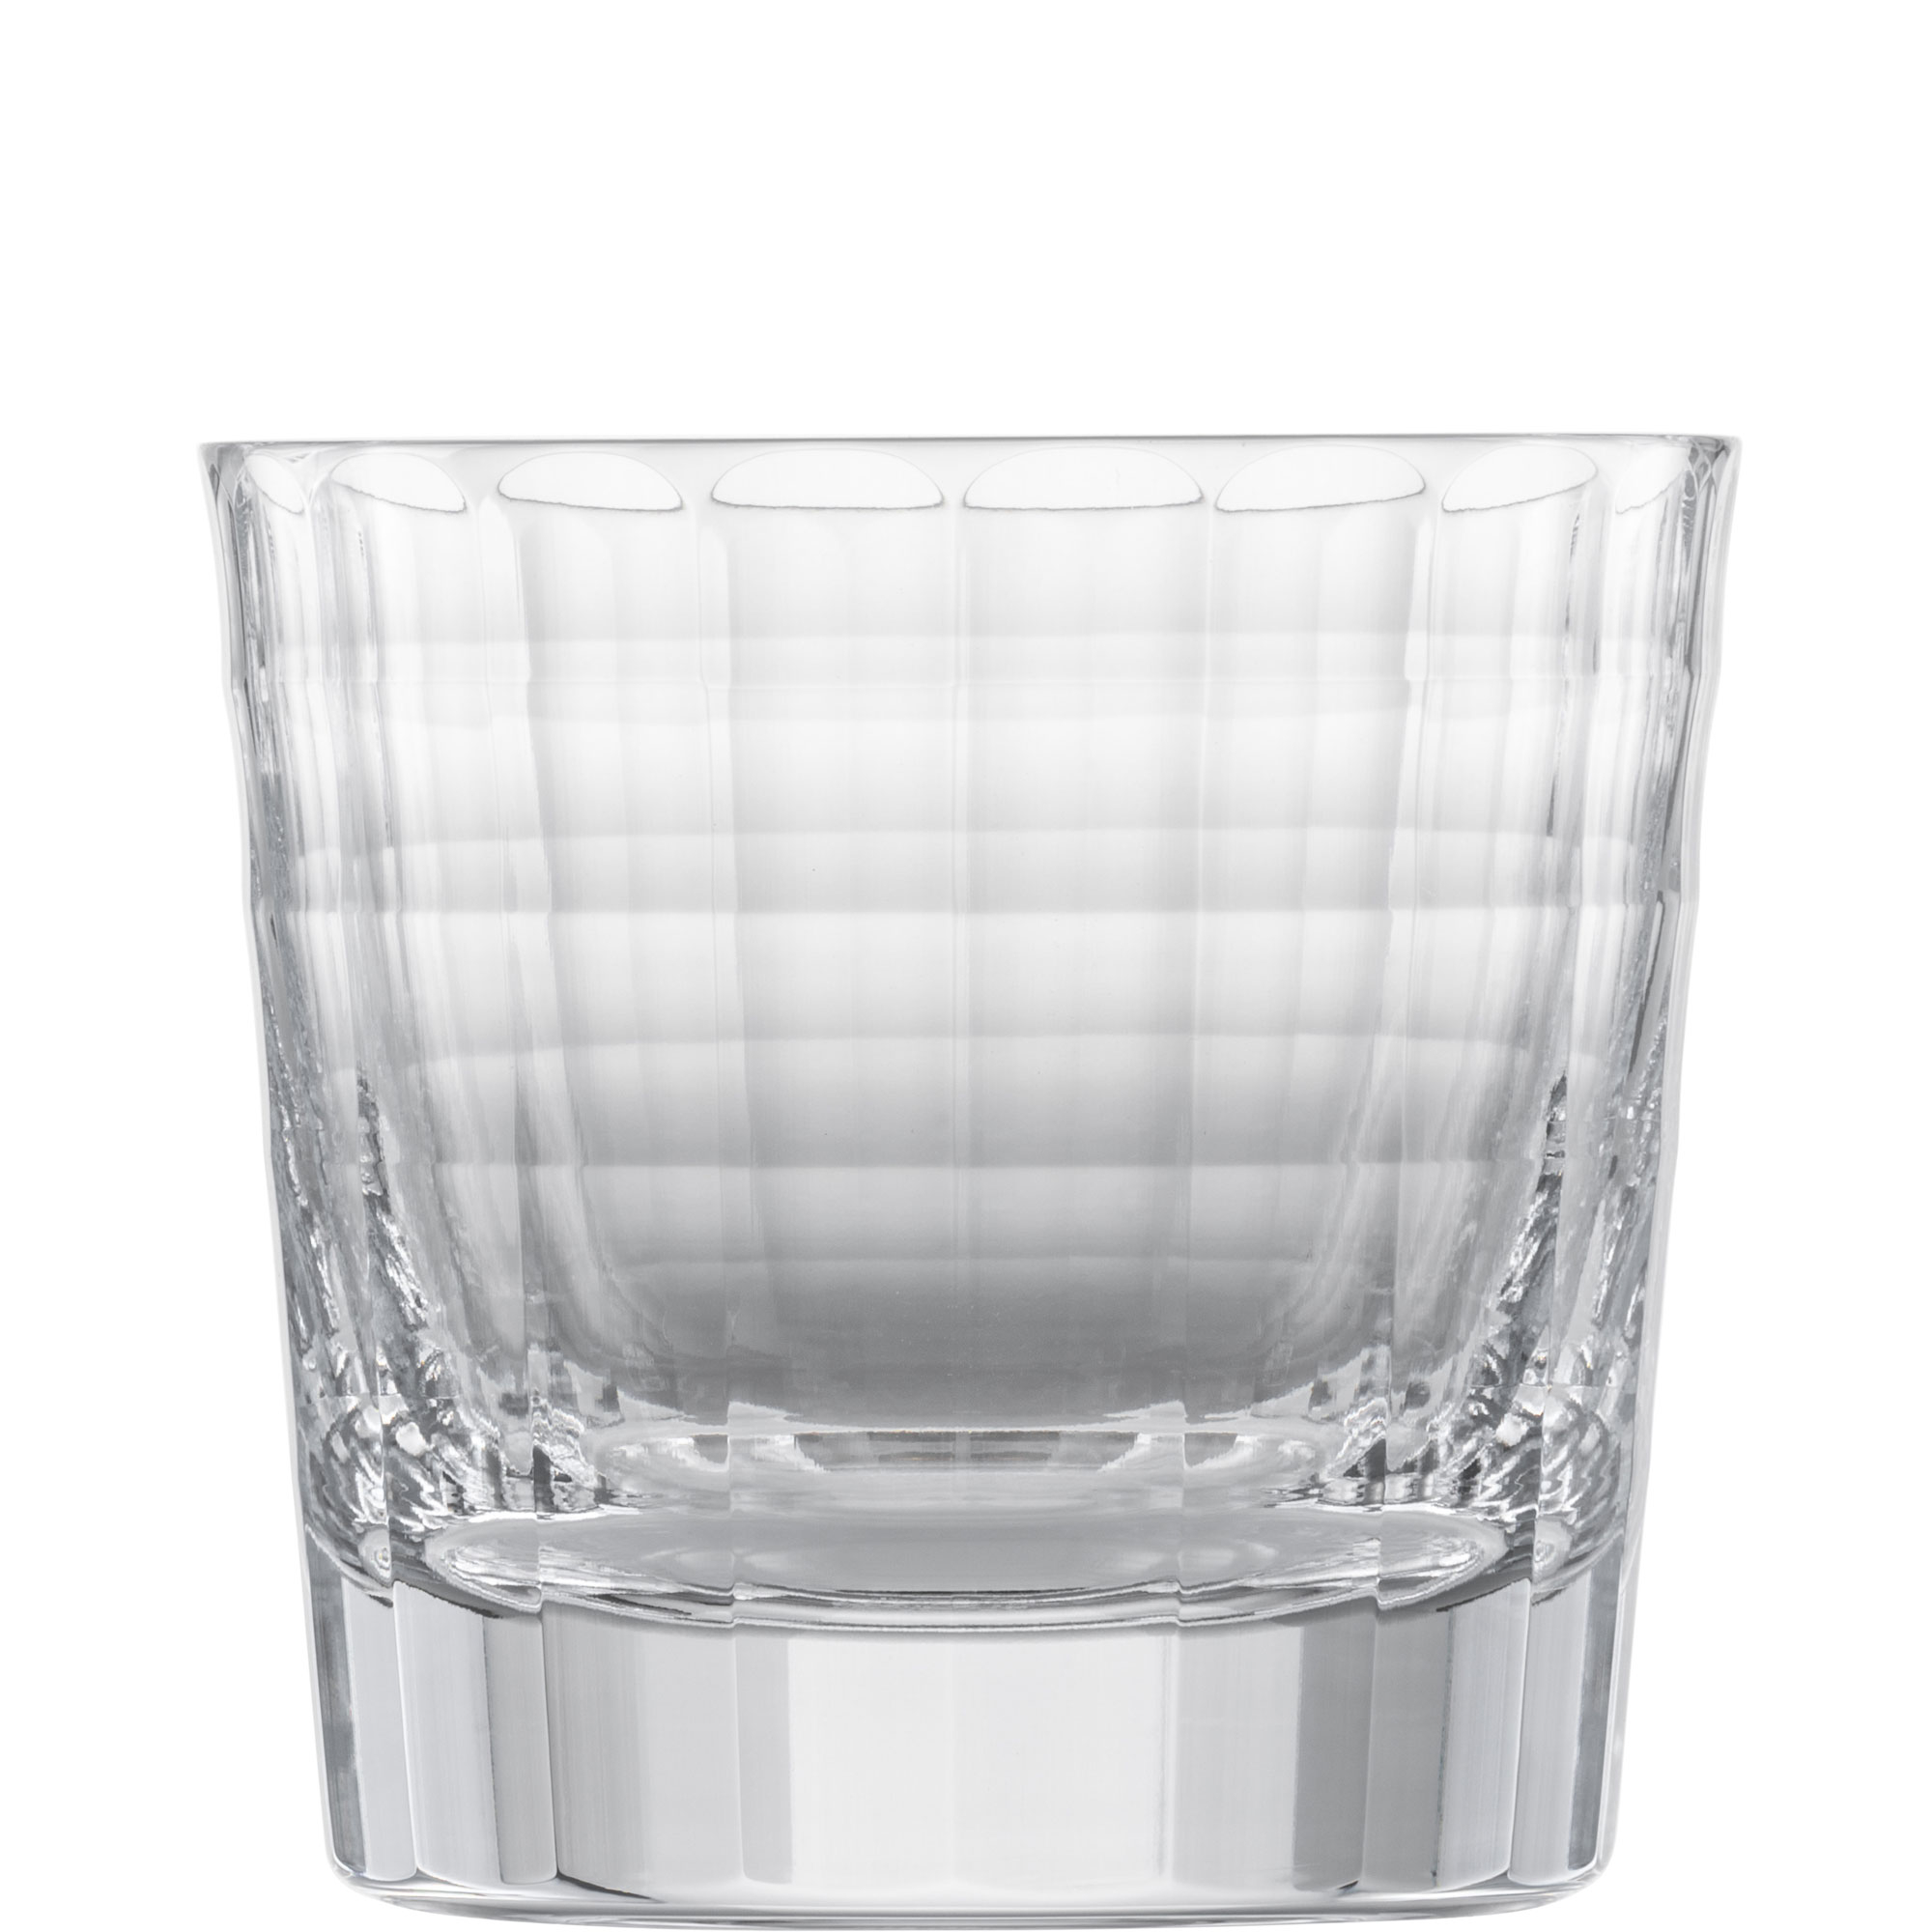 Whisky glass Hommage Carat, Zwiesel Glas - 384ml (1 pc.)